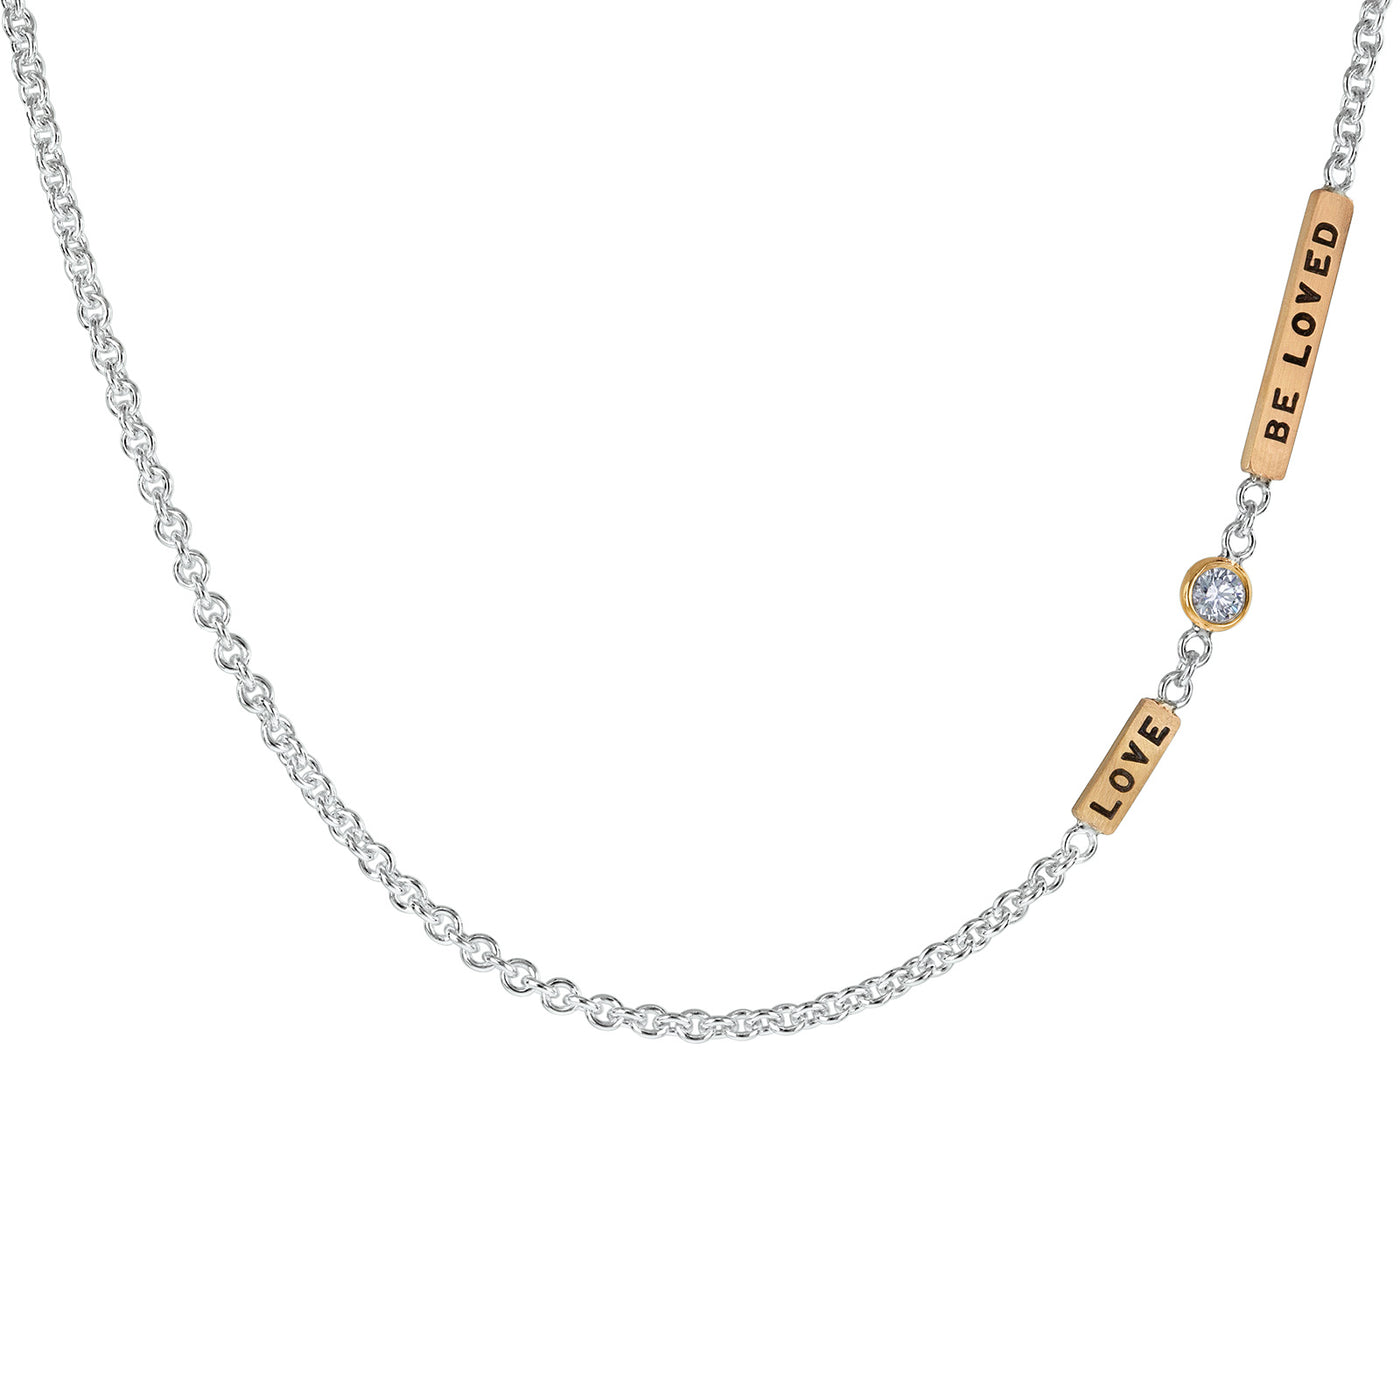 2mm Silver Love, Be Loved Chain